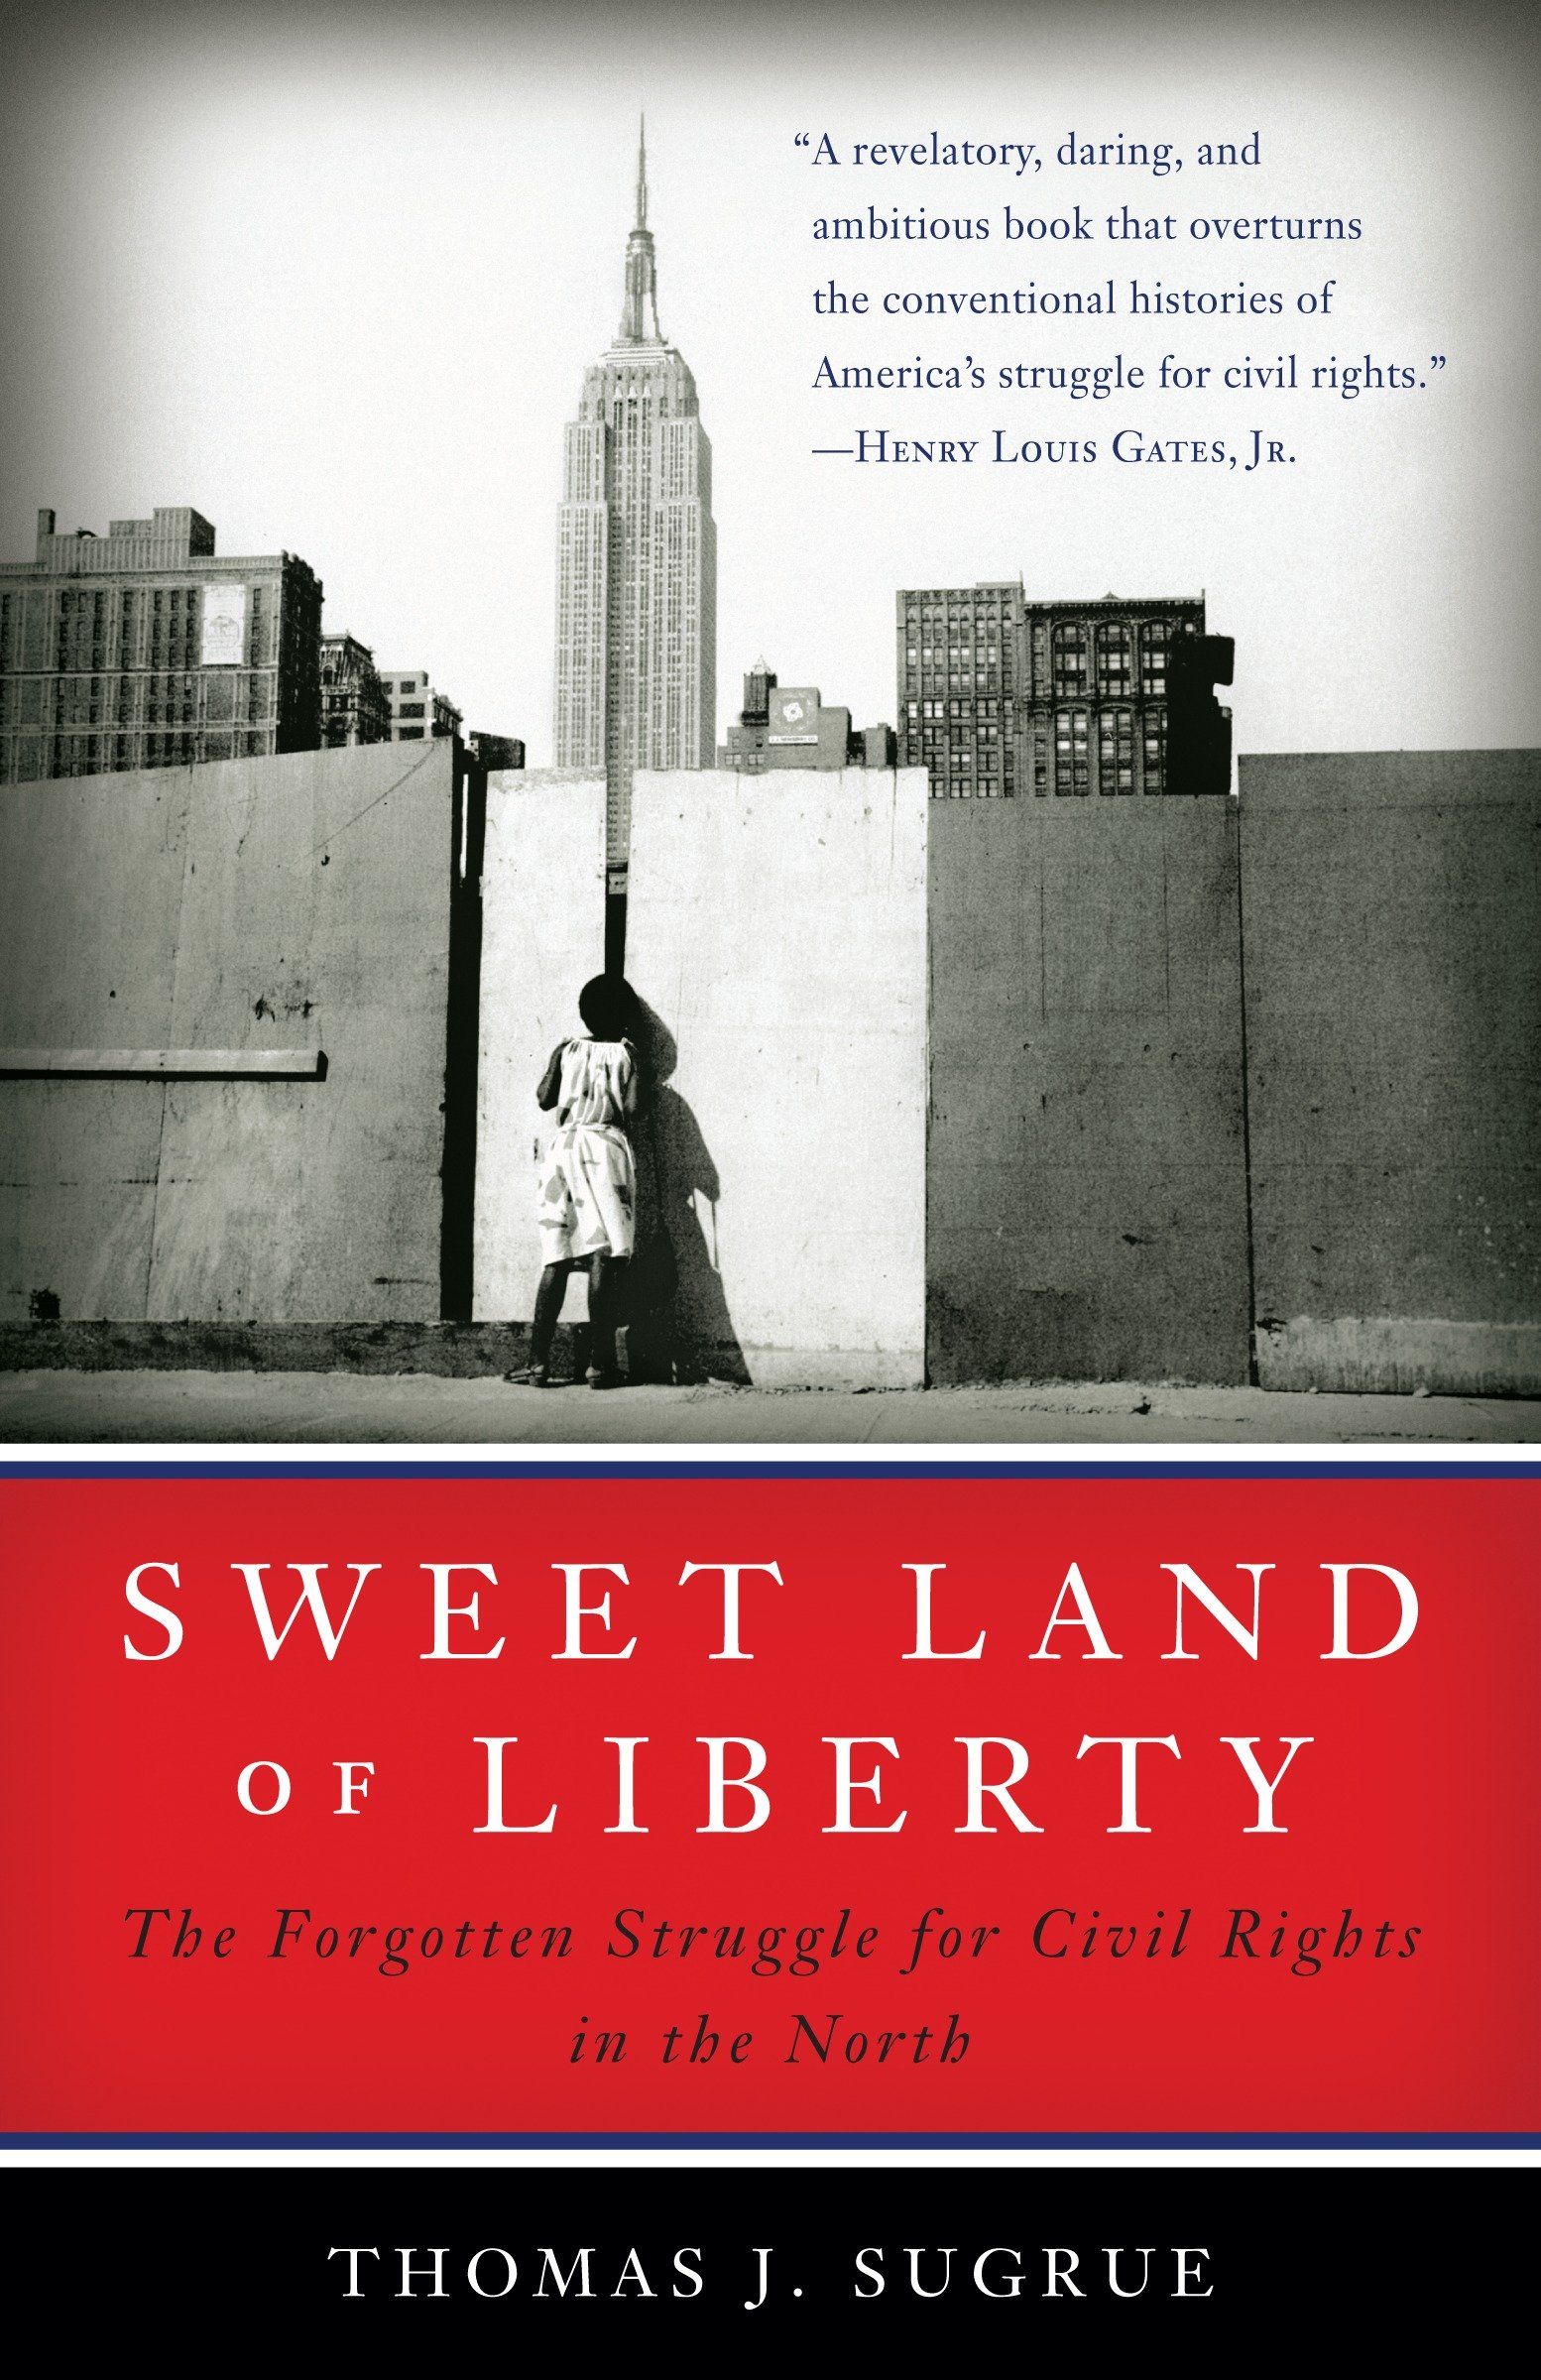 Cover of Sweet Land of Liberty: THE FORGOTTEN STRUGGLE FOR CIVIL RIGHTS IN THE NORTH By Thomas J. Sugrue